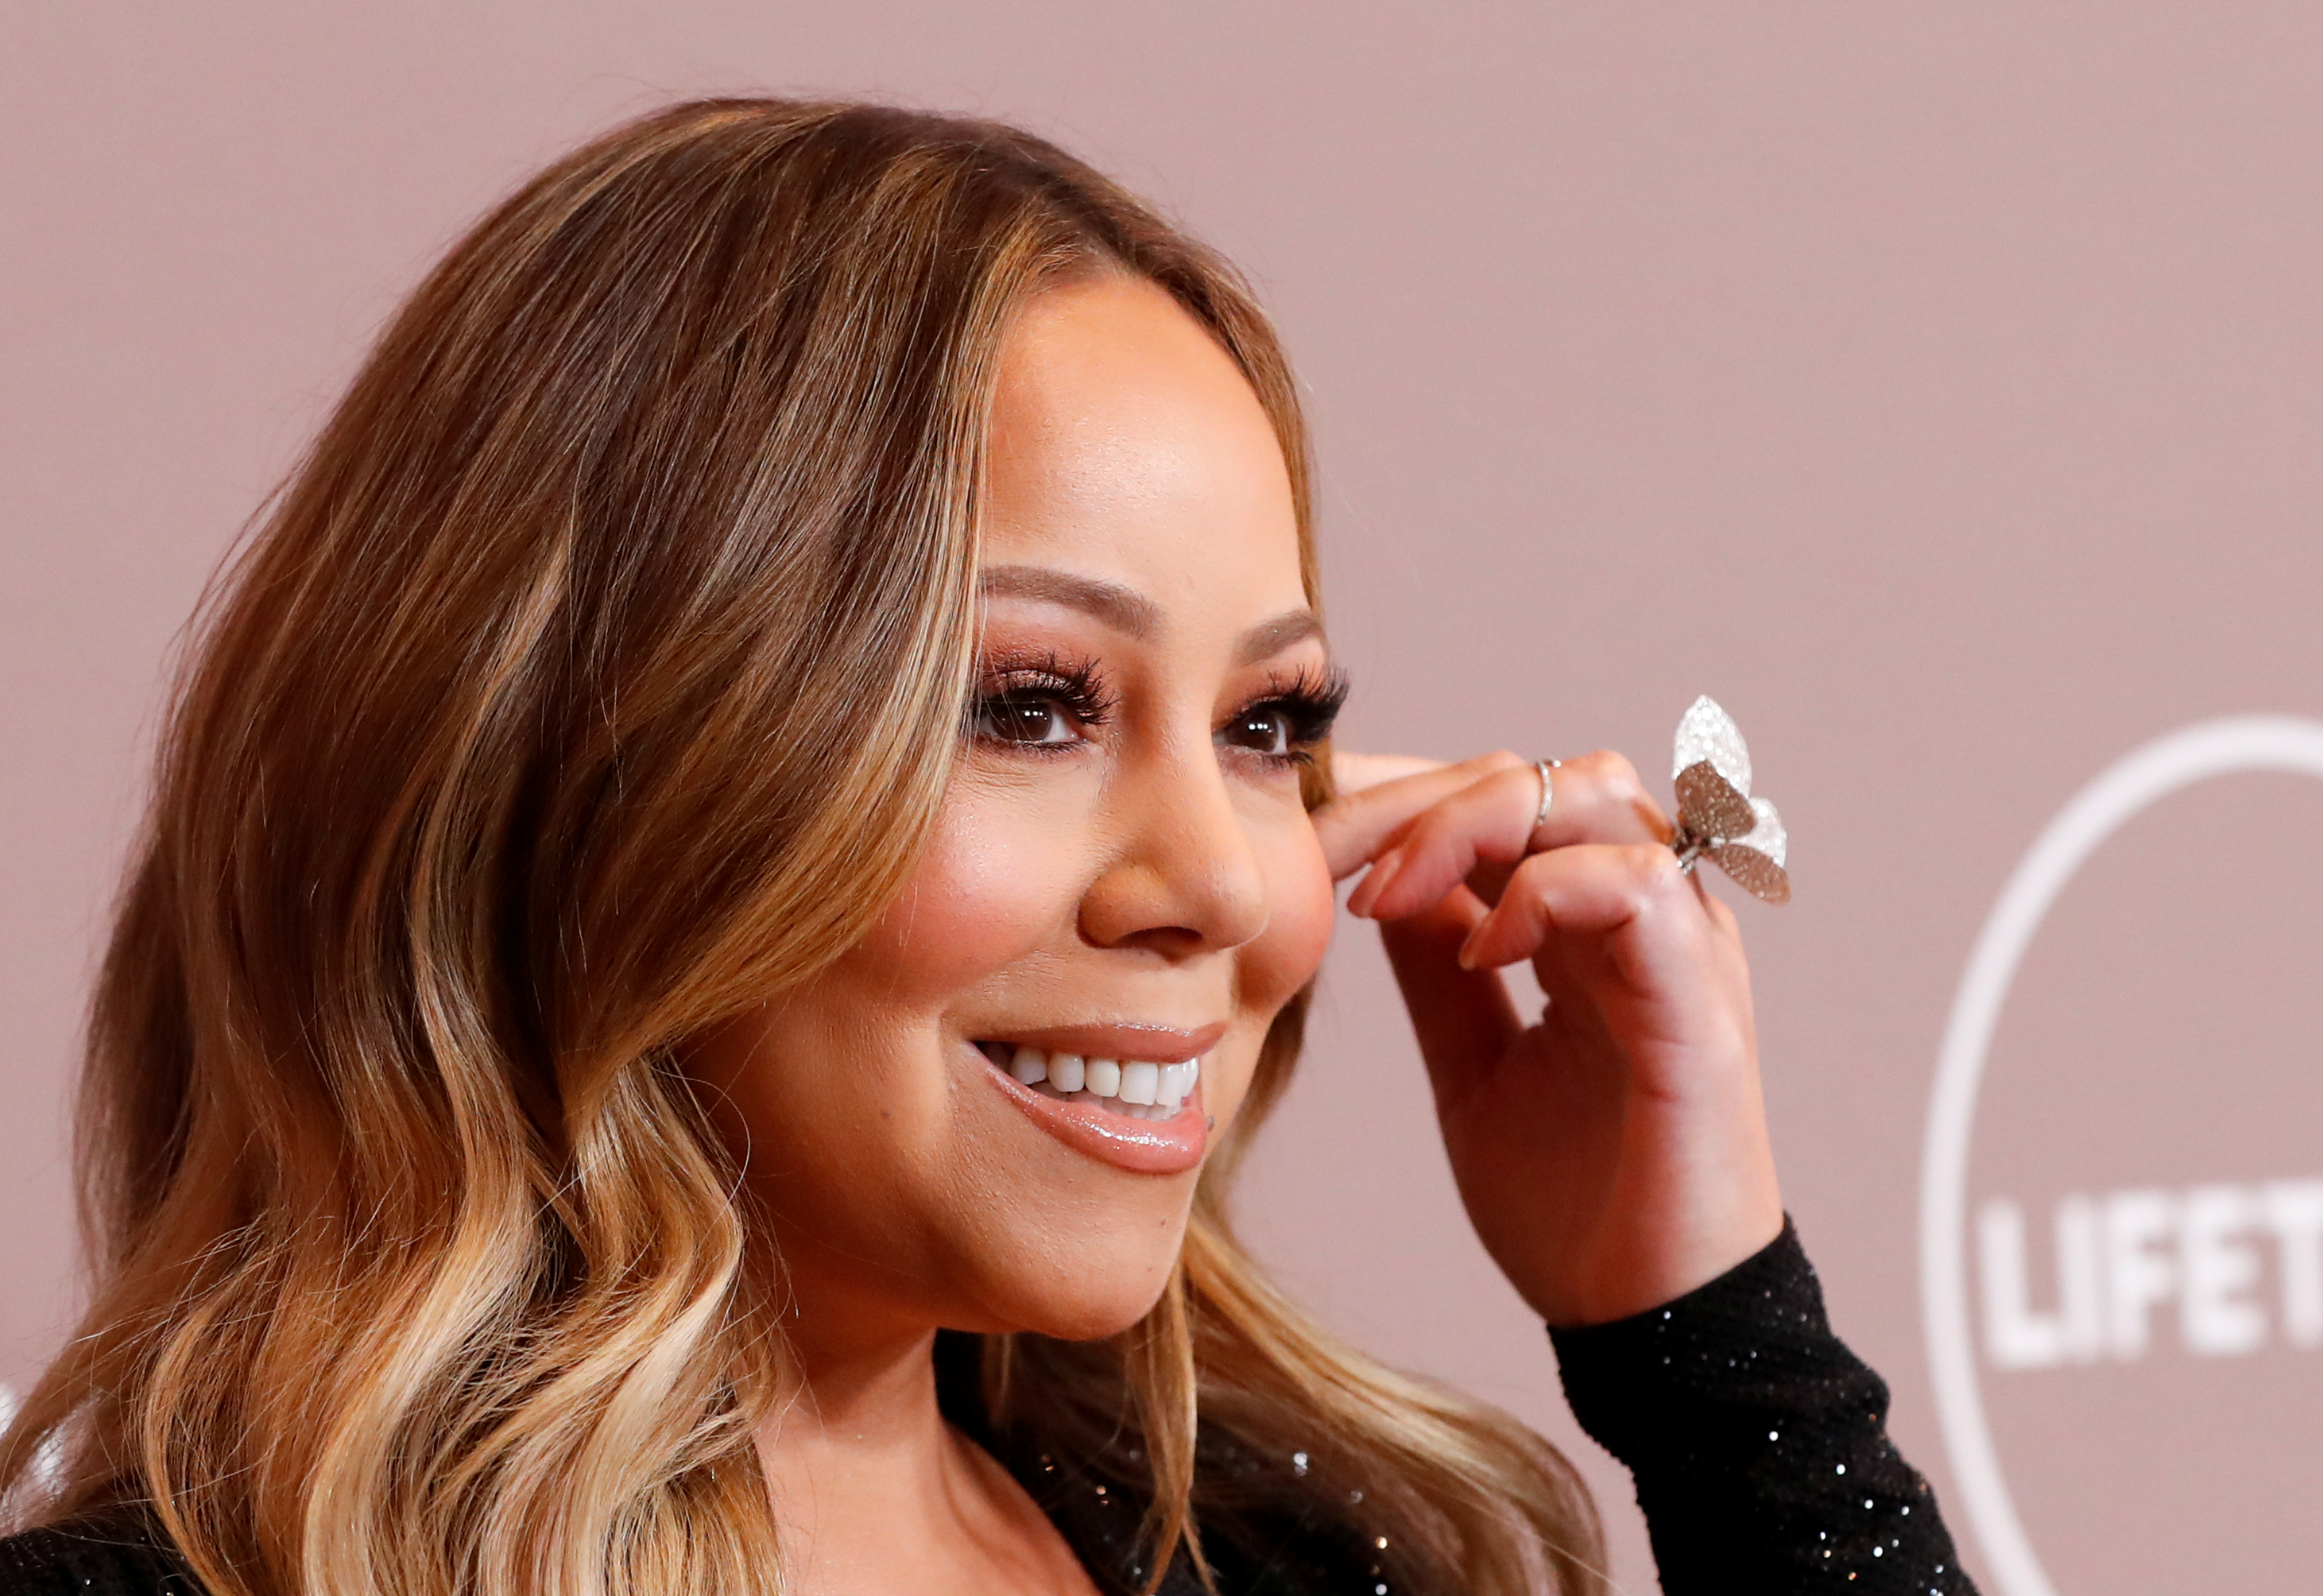 Singer Mariah Carey poses as she attends Variety's 2019 Power of Women: Los Angeles